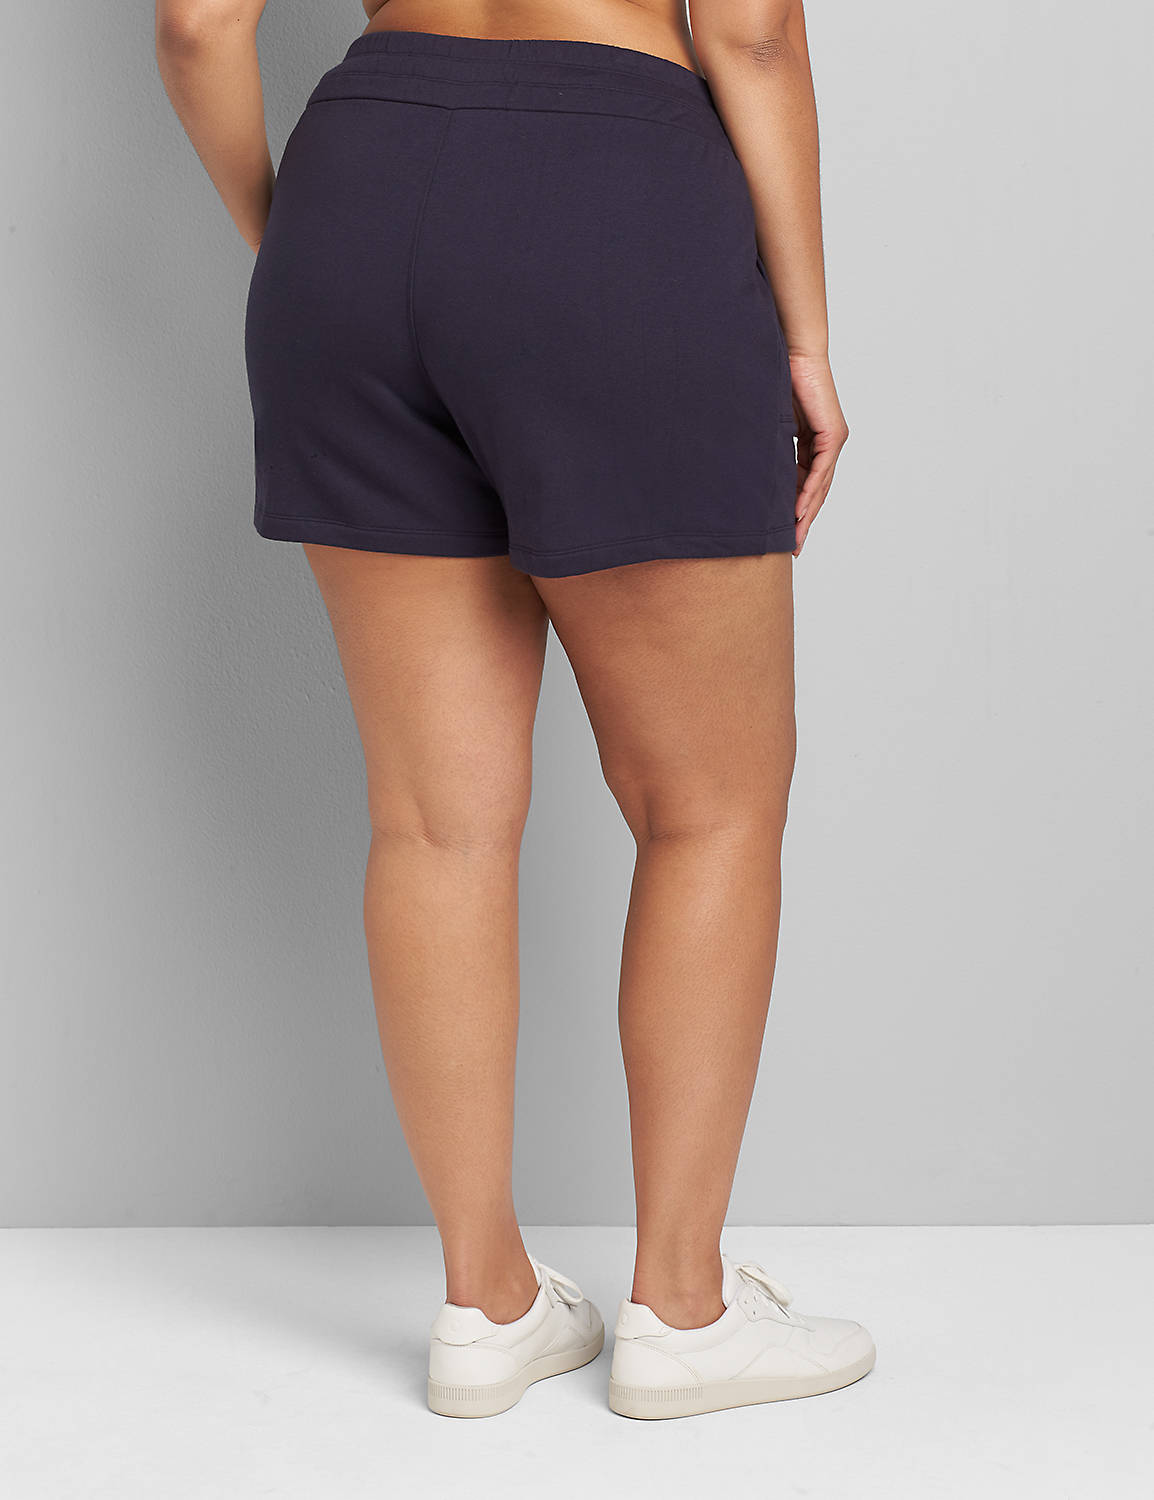 Pull On French Terry Short  S 11201 Product Image 2